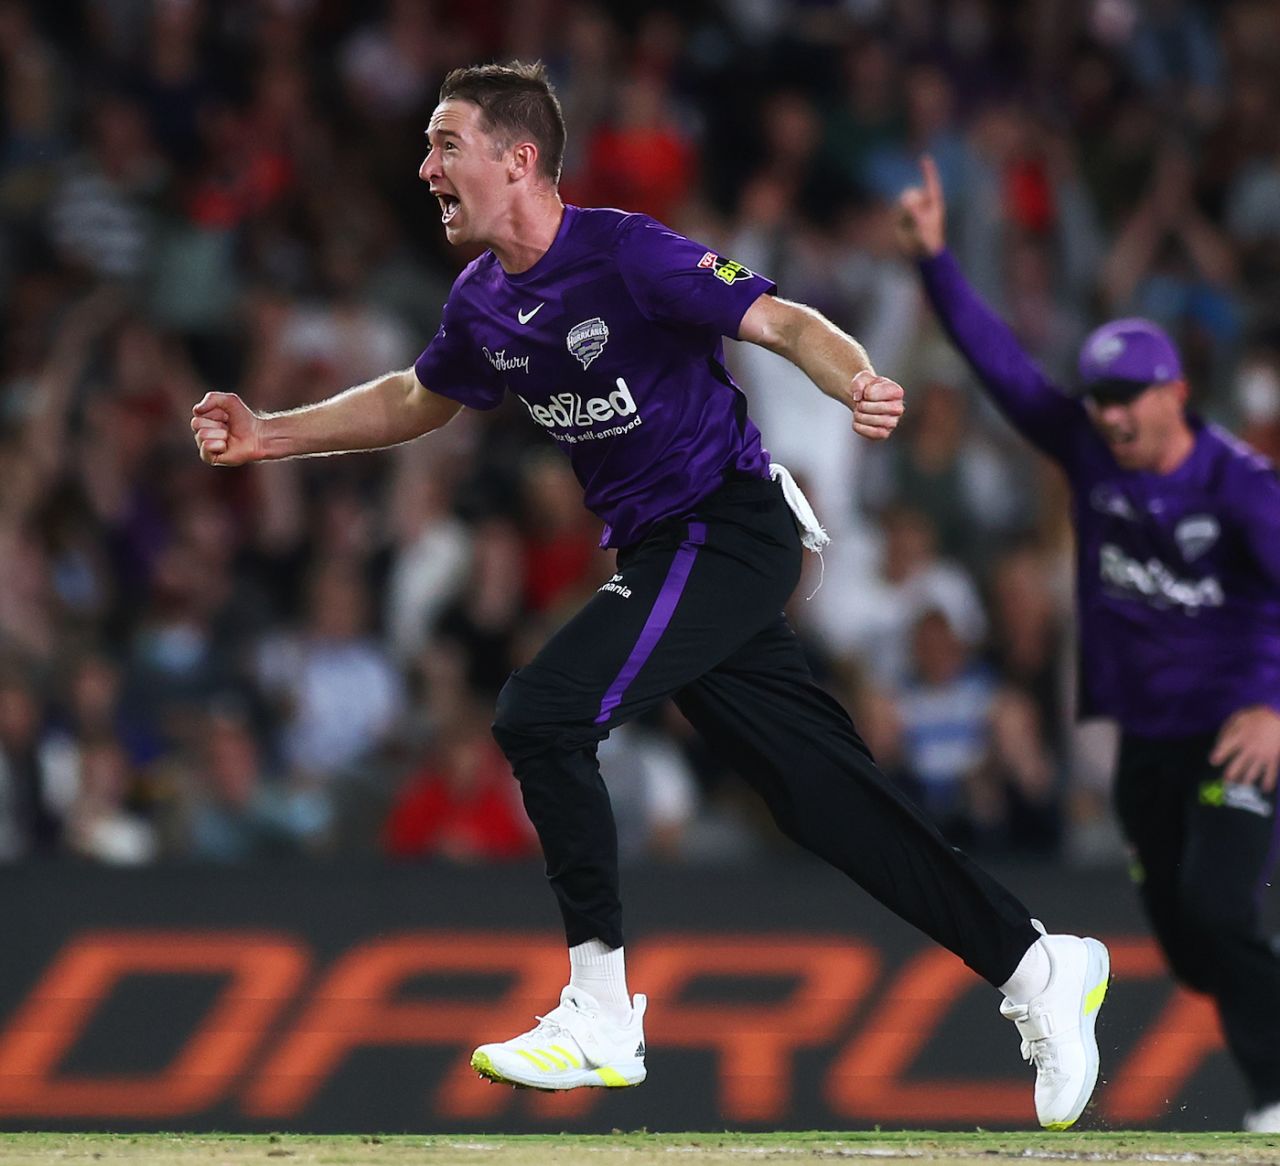 Tom Rogers picked up three wickets in his first two overs, Melbourne Renegades vs Hobart Hurricanes, BBL 2021-22, Melbourne, December 29, 2021